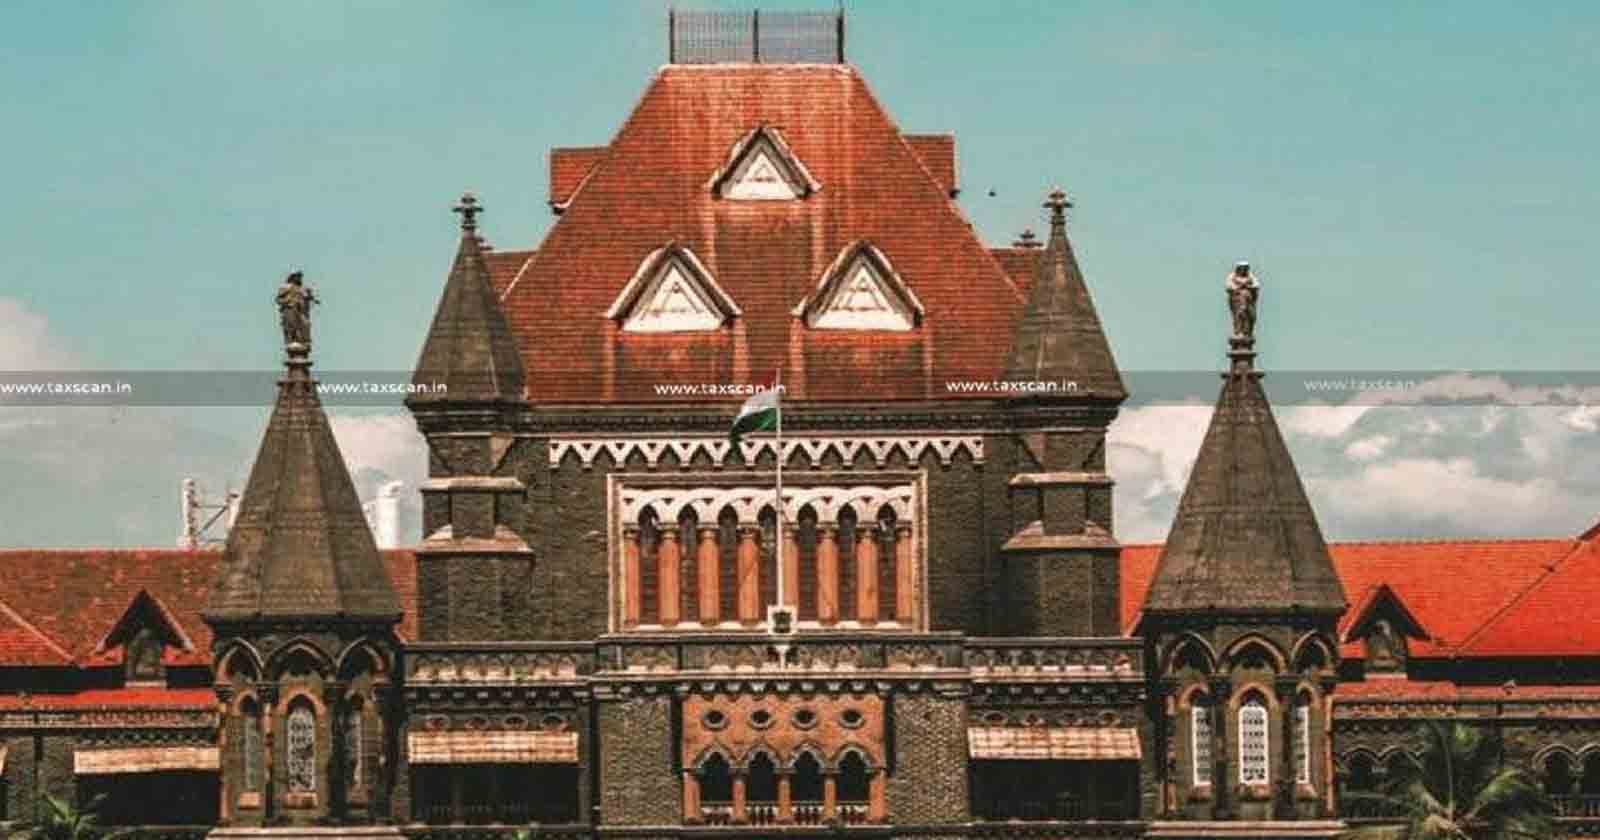 Filing of Application - Appoint Arbitrator Bombay HC - High Court - HC - Application to Appoint Arbitrator Bombay HC - taxscan